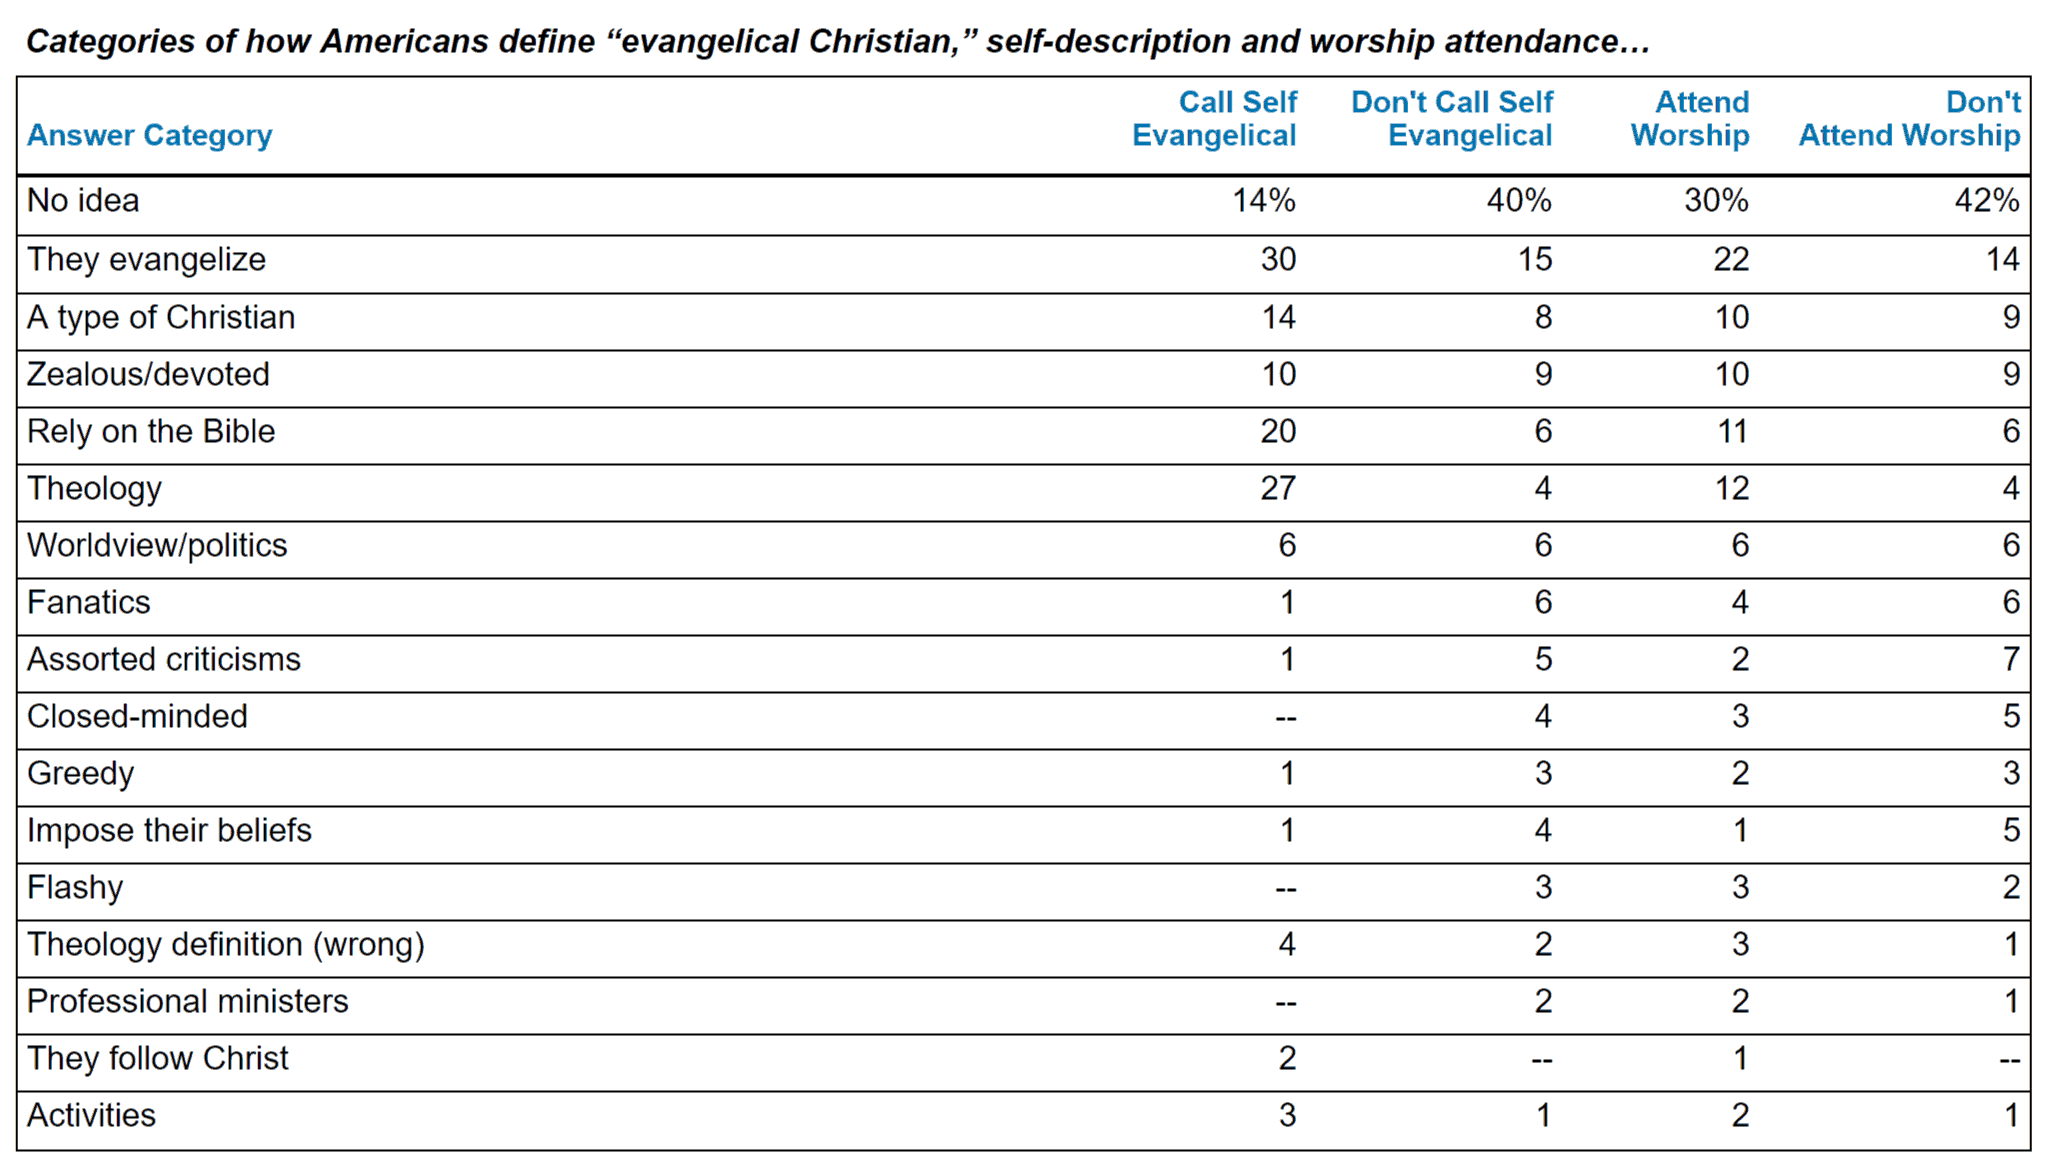 What do Americans think an “evangelical Christian” is?